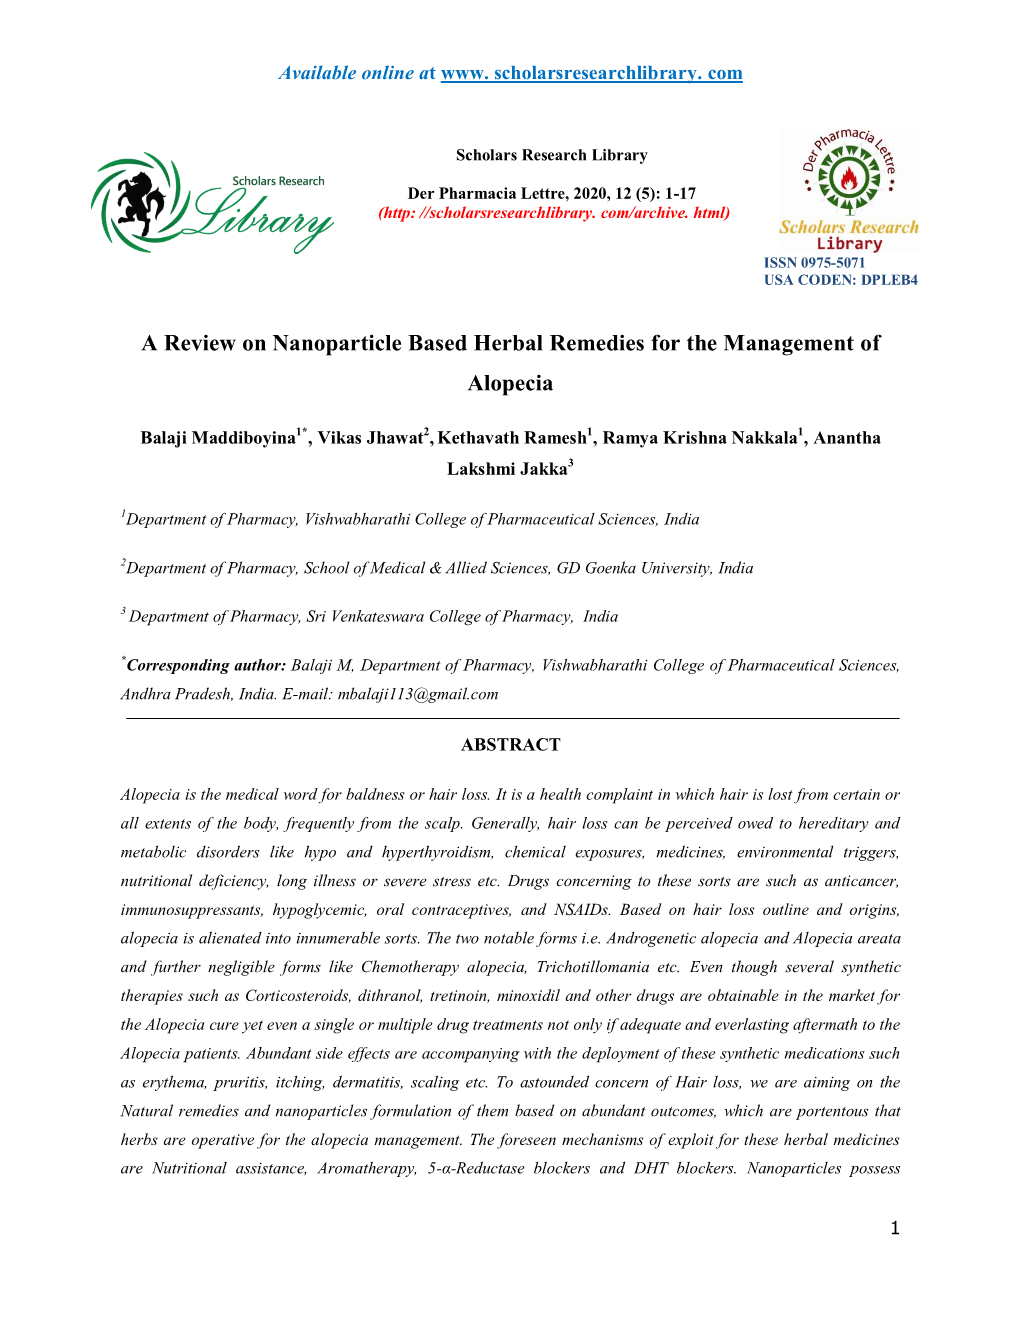 A Review on Nanoparticle Based Herbal Remedies for the Management of Alopecia